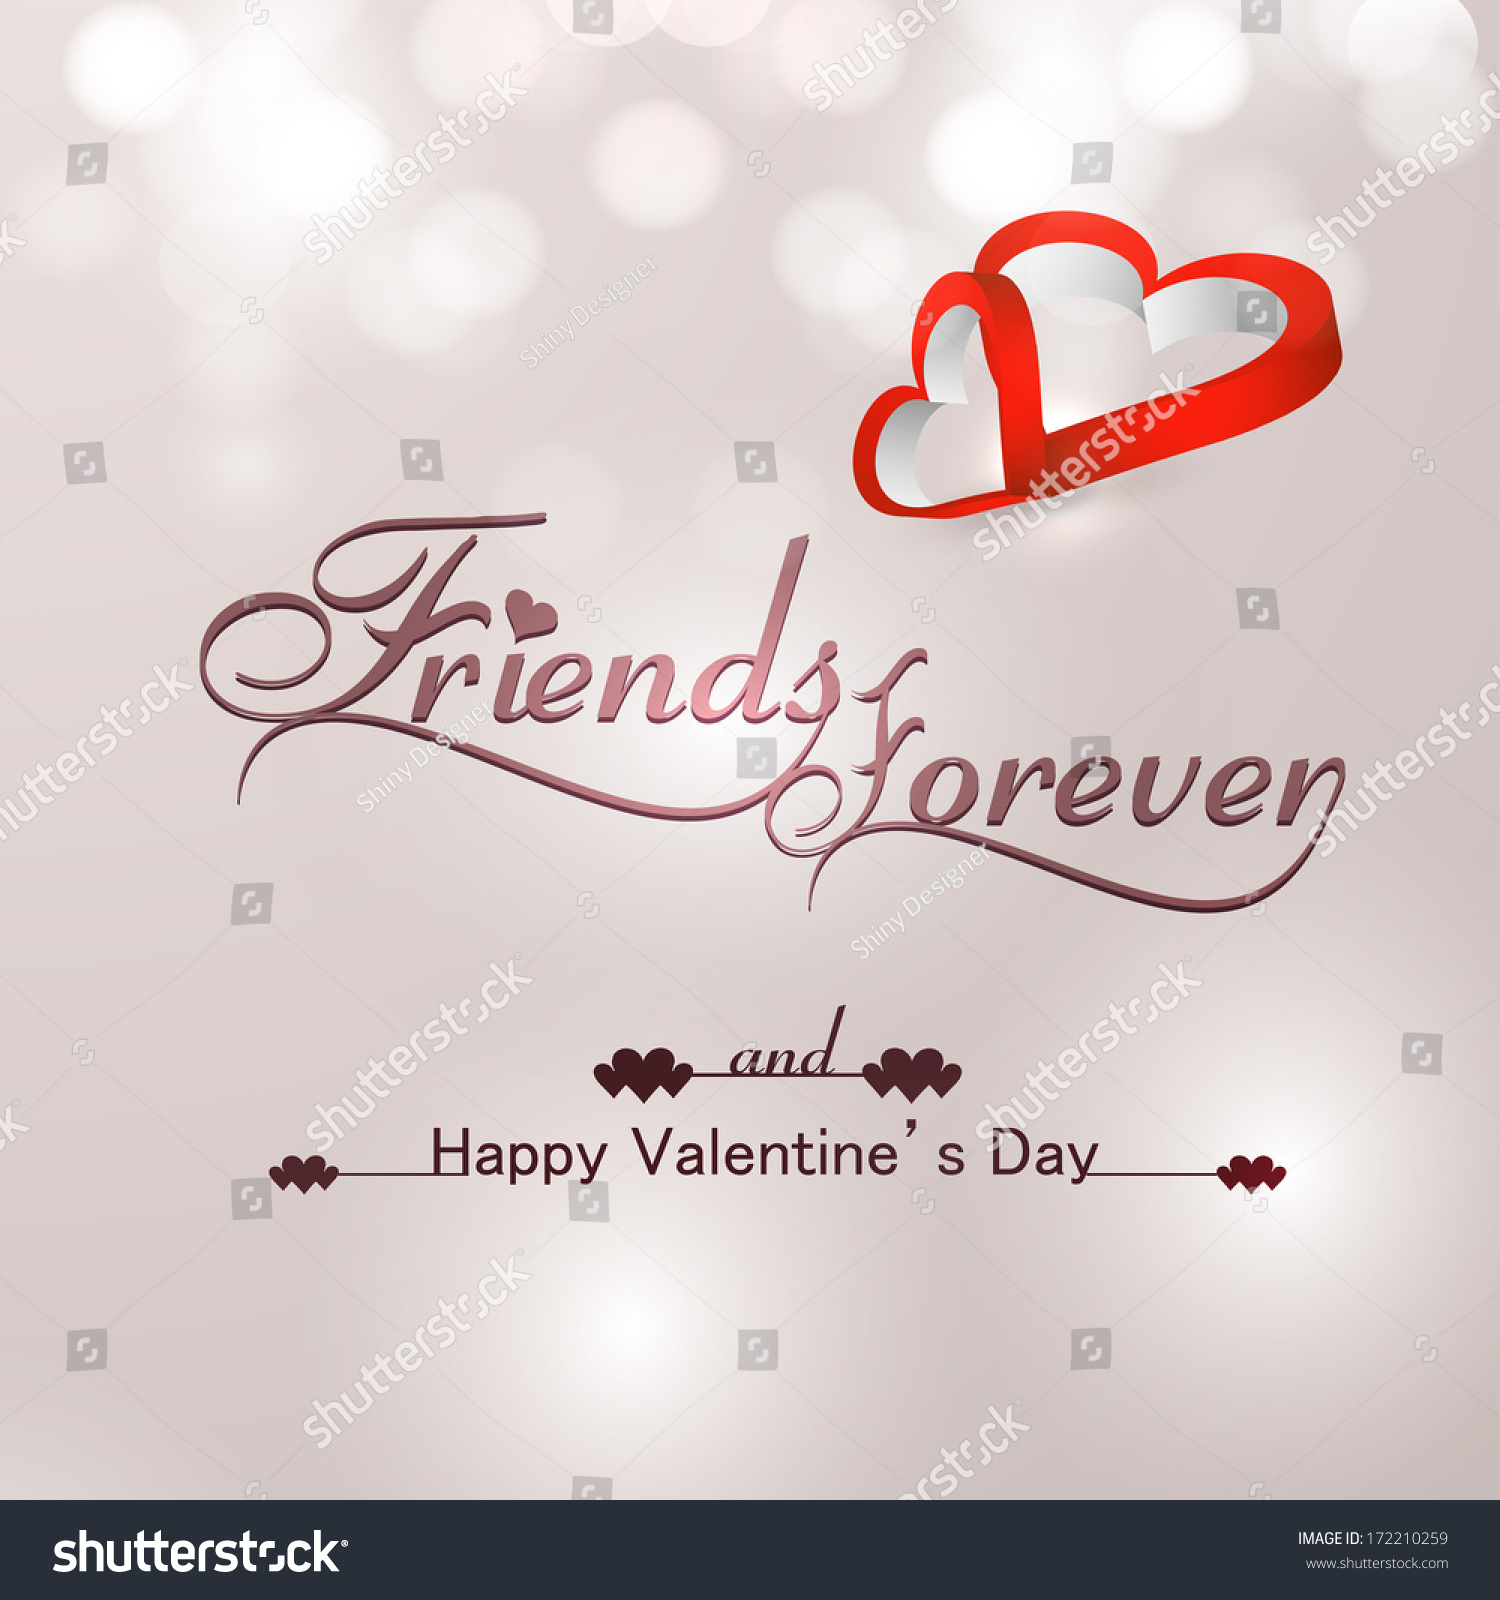 Beautiful Friends Forever Happy Valentines Day Stock Vector Royalty Free